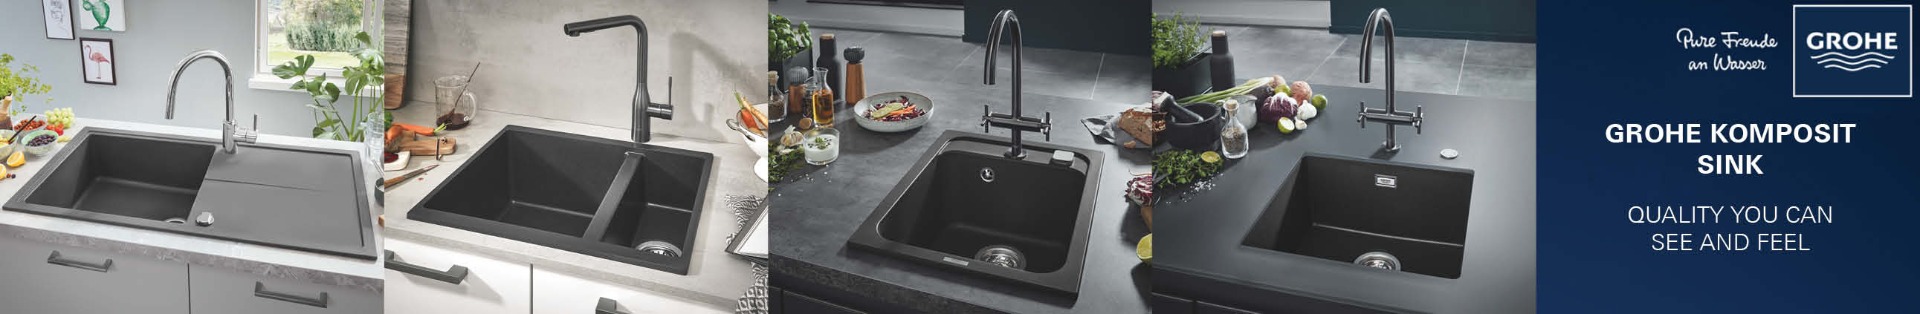 Grohe Stainless Steel And Composite Sinks Skybad De Bath Shop